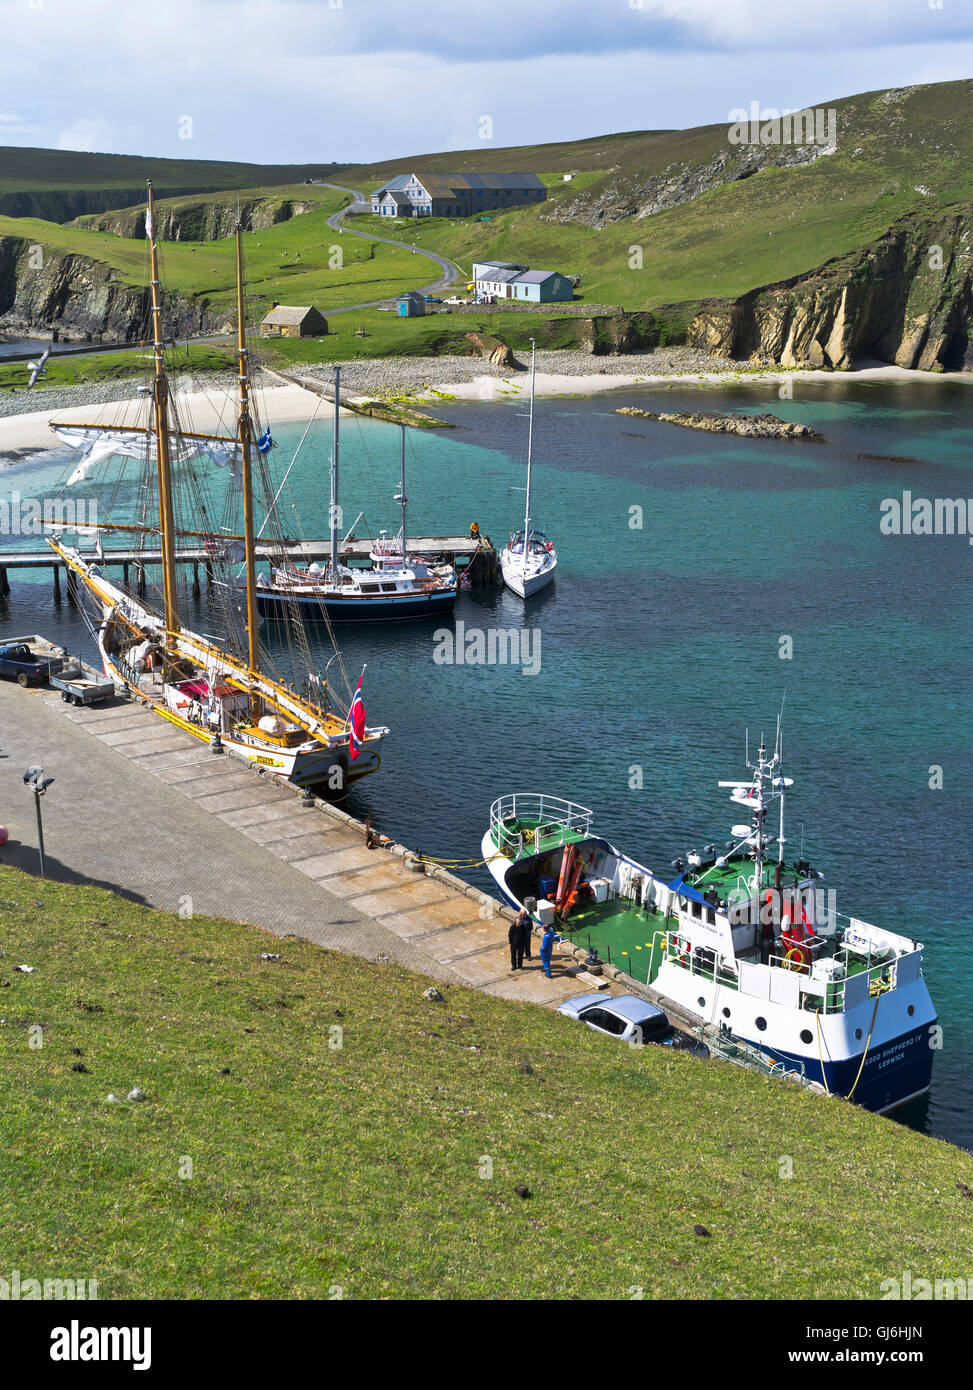 dh Good Shepherd IV NORTH HAVEN HARBOUR FAIR ISLE  SCOTLAND Island Ferry Tall ship mail boat yachts Stock Photo